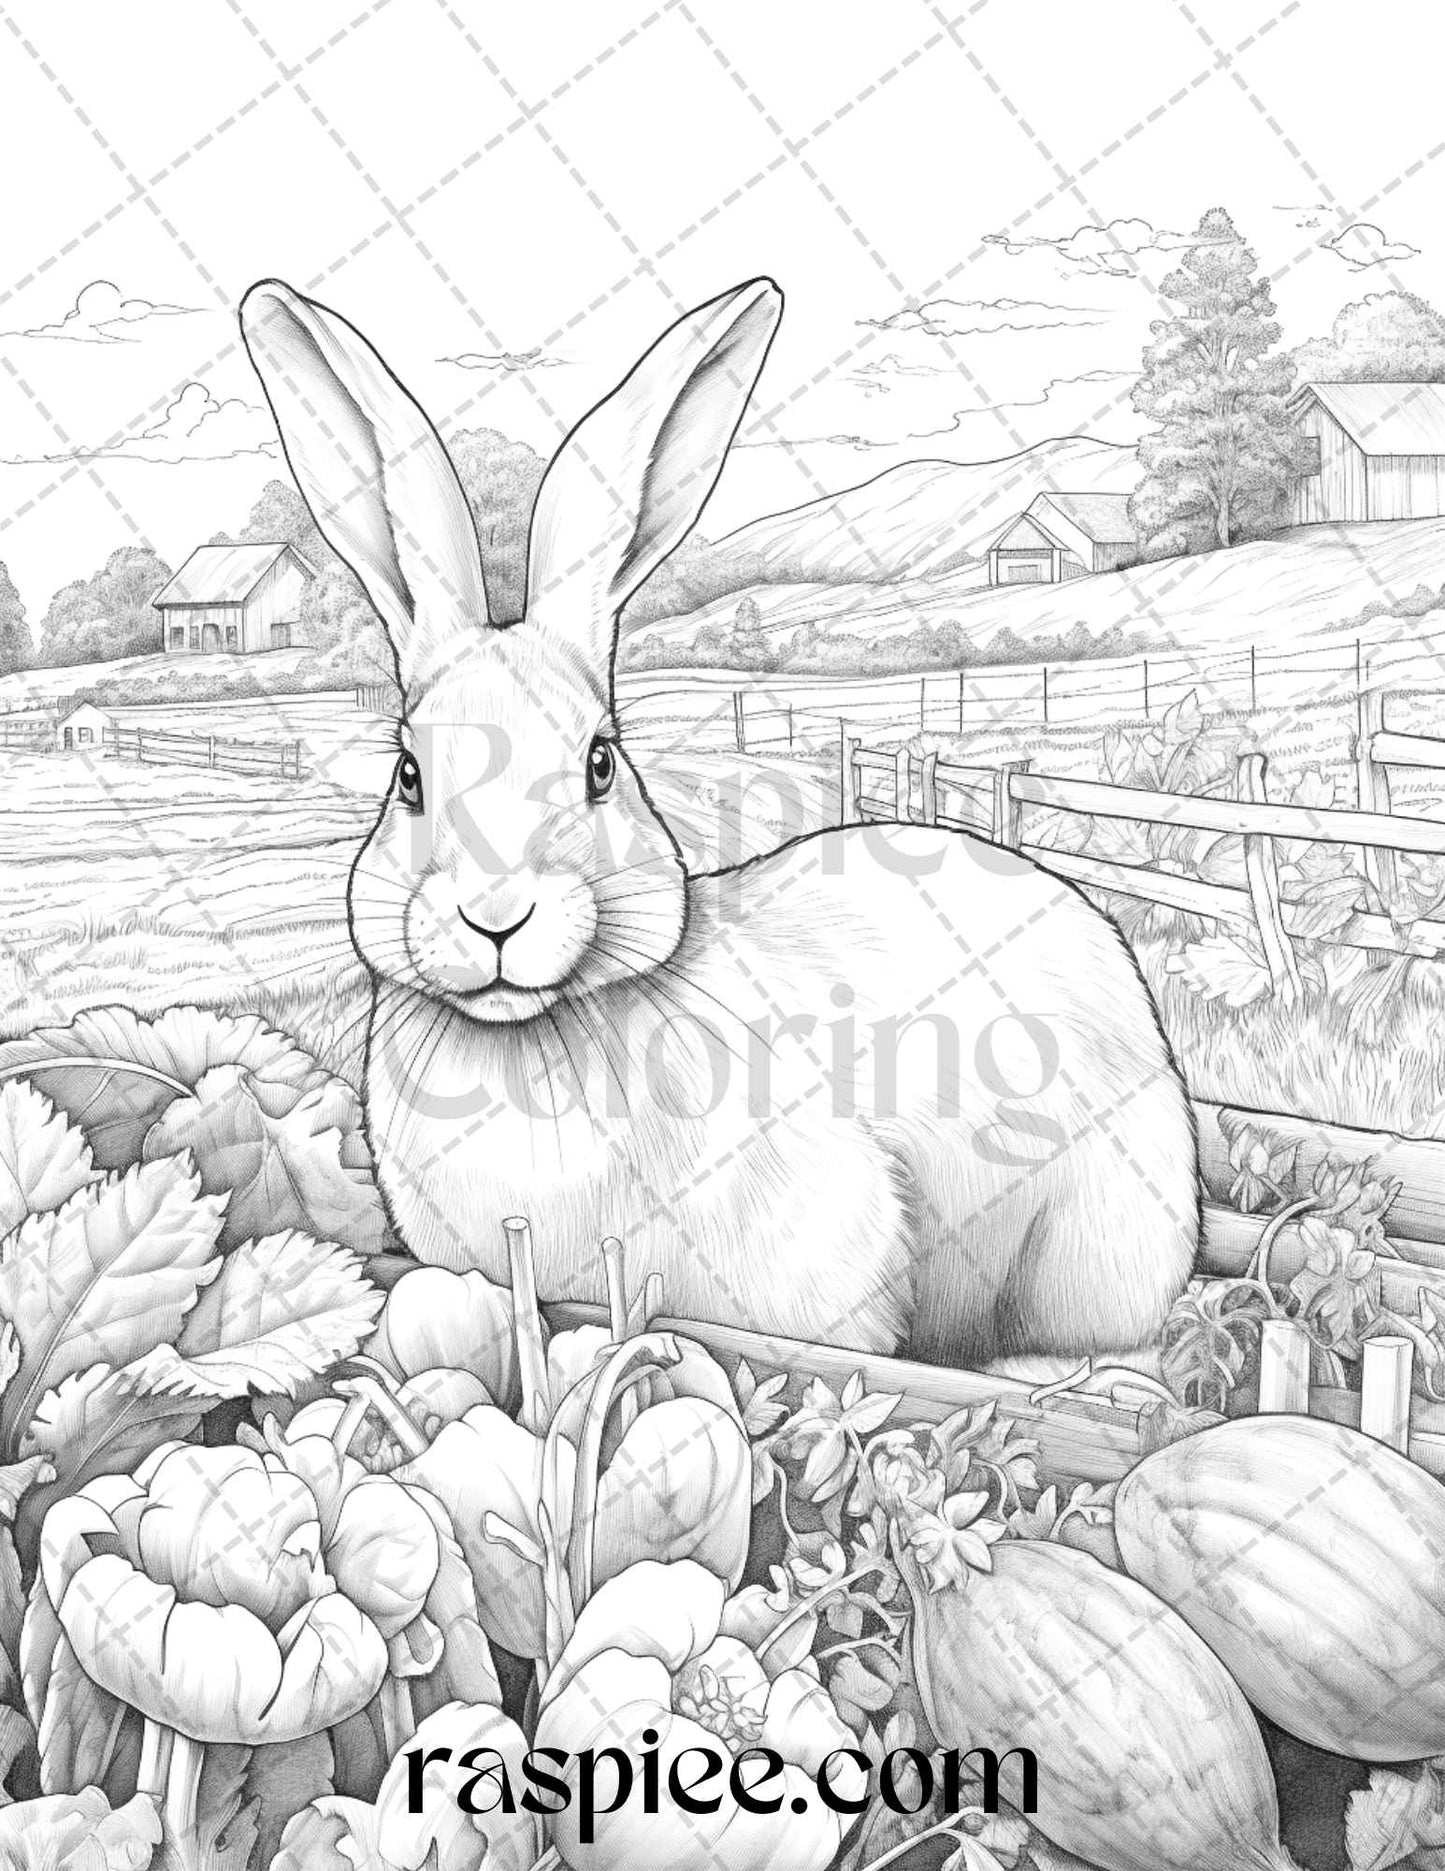 40 Farmstead Serenity Grayscale Coloring Pages Printable for Adults, PDF File Instant Download - raspiee